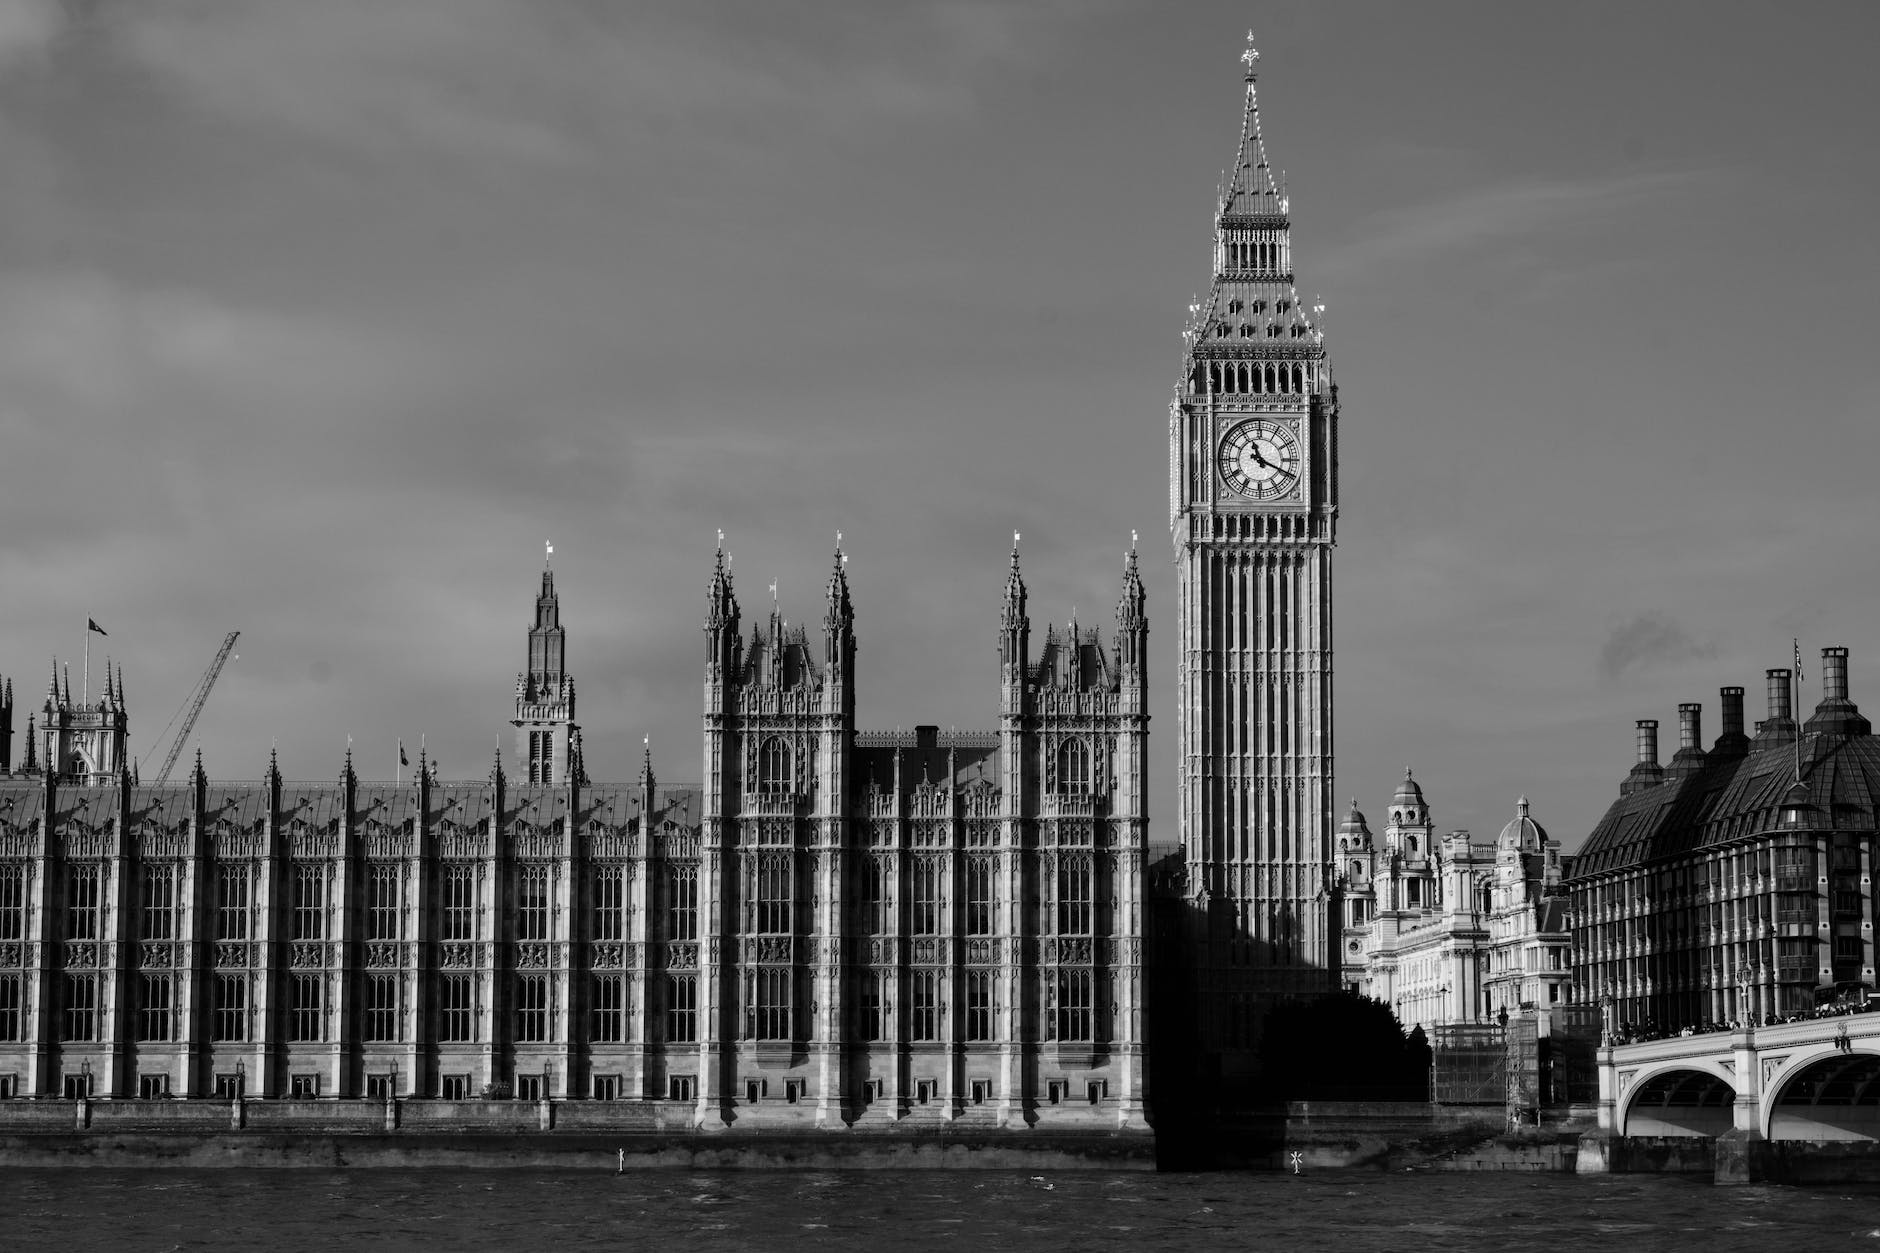 westminster palace and big ben in black and white